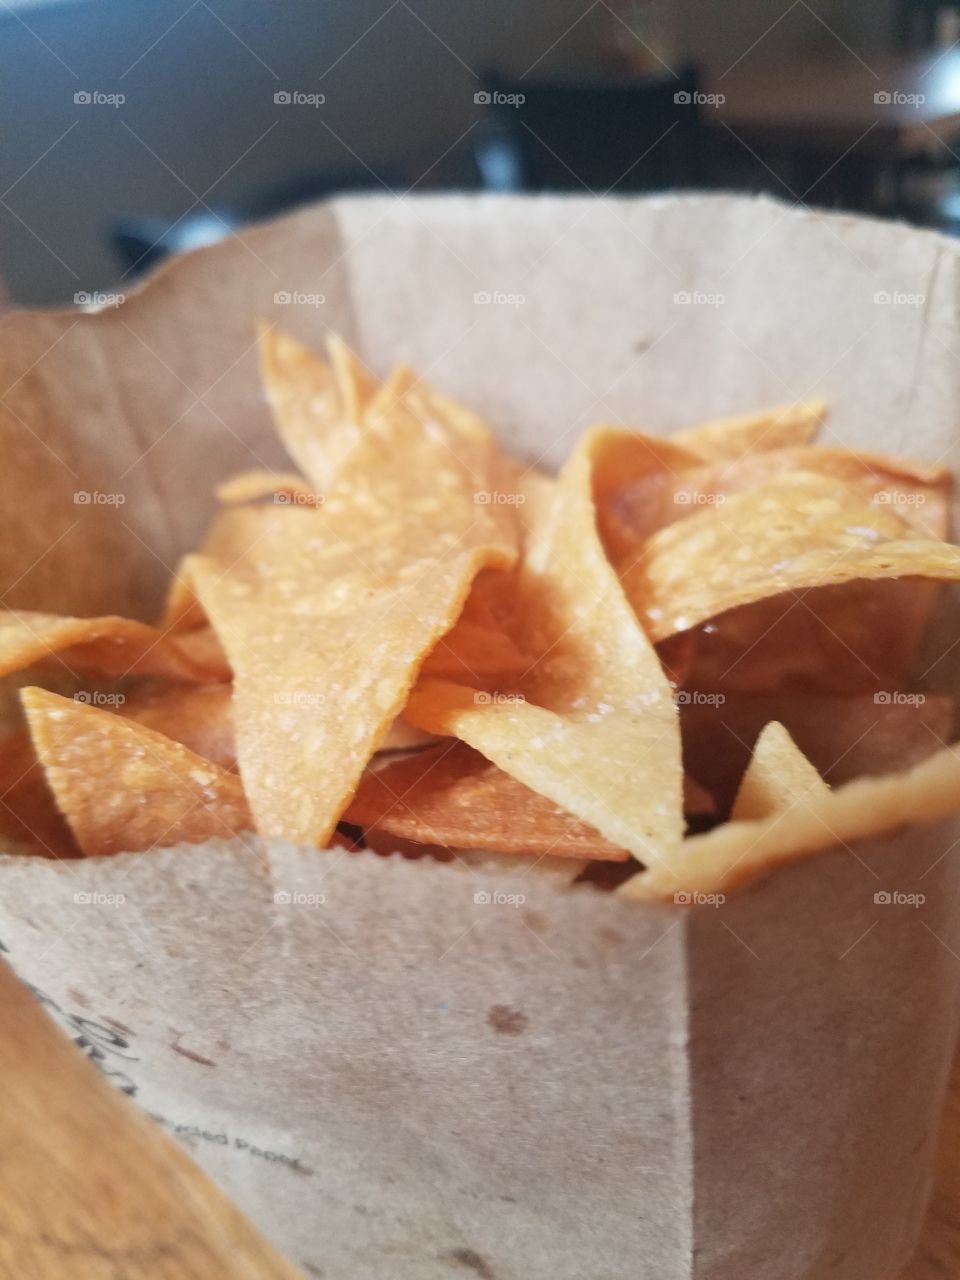 tortilla chips at the local Mexican cantina, delicious, salty, crunchy, greasy. Totally yummy.